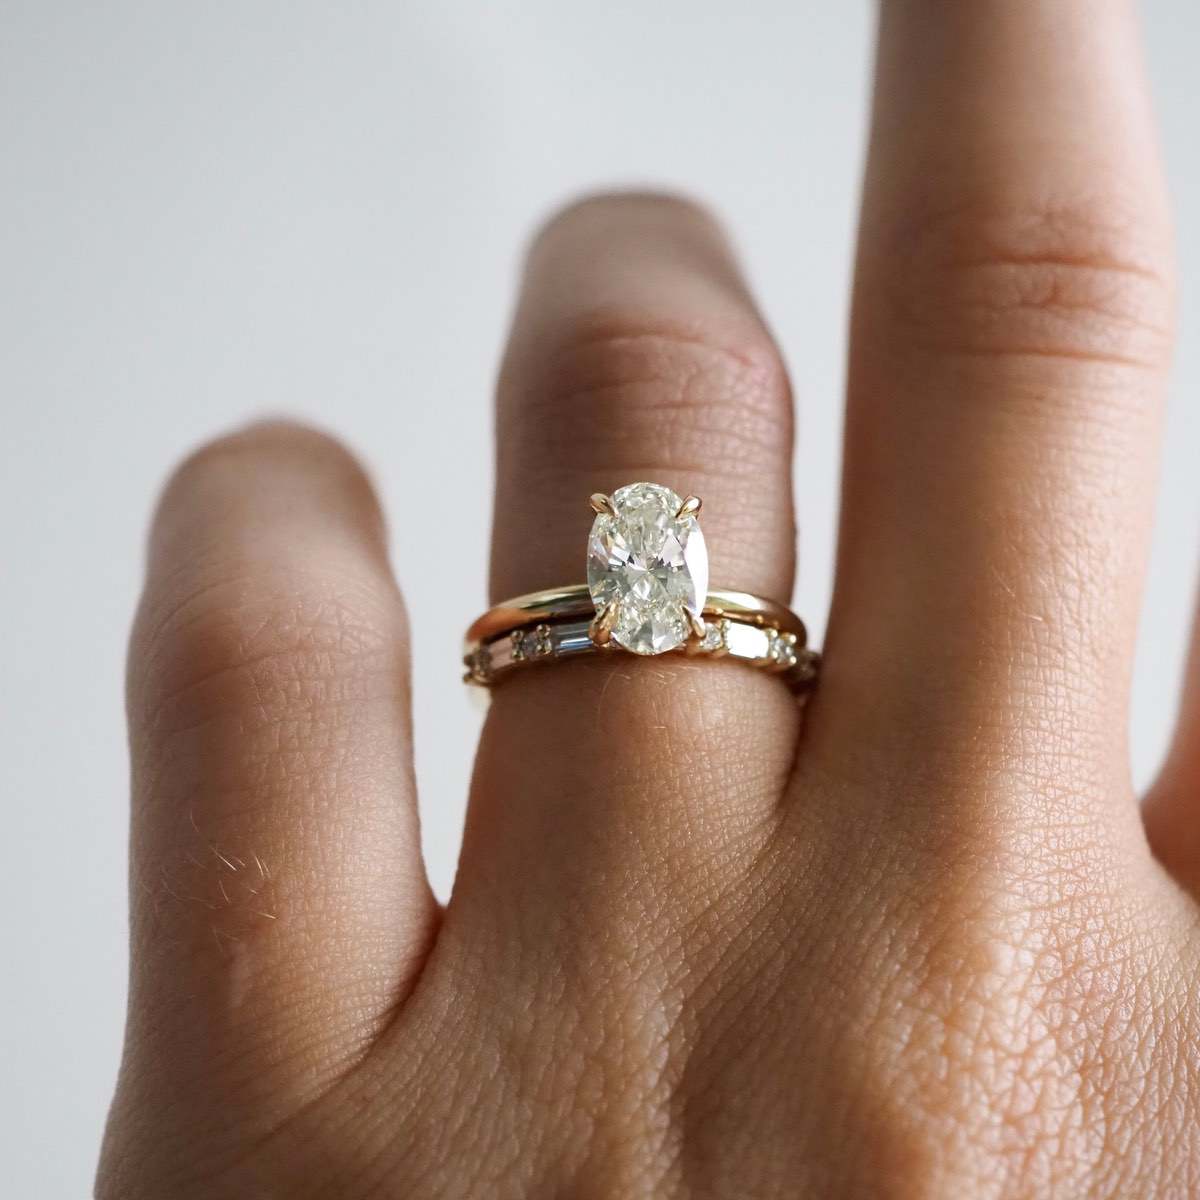 A seamless blend of claw set baguette & round brilliant cut lab-grown diamonds — created to pair perfectly alongside an engagement ring, or to be worn alone. Stone size 0.015ct each for round lab-grown diamonds and 0.04ct for baguette lab-grown diamonds. Featuring our Oval solitaire engagement ring, Clara.